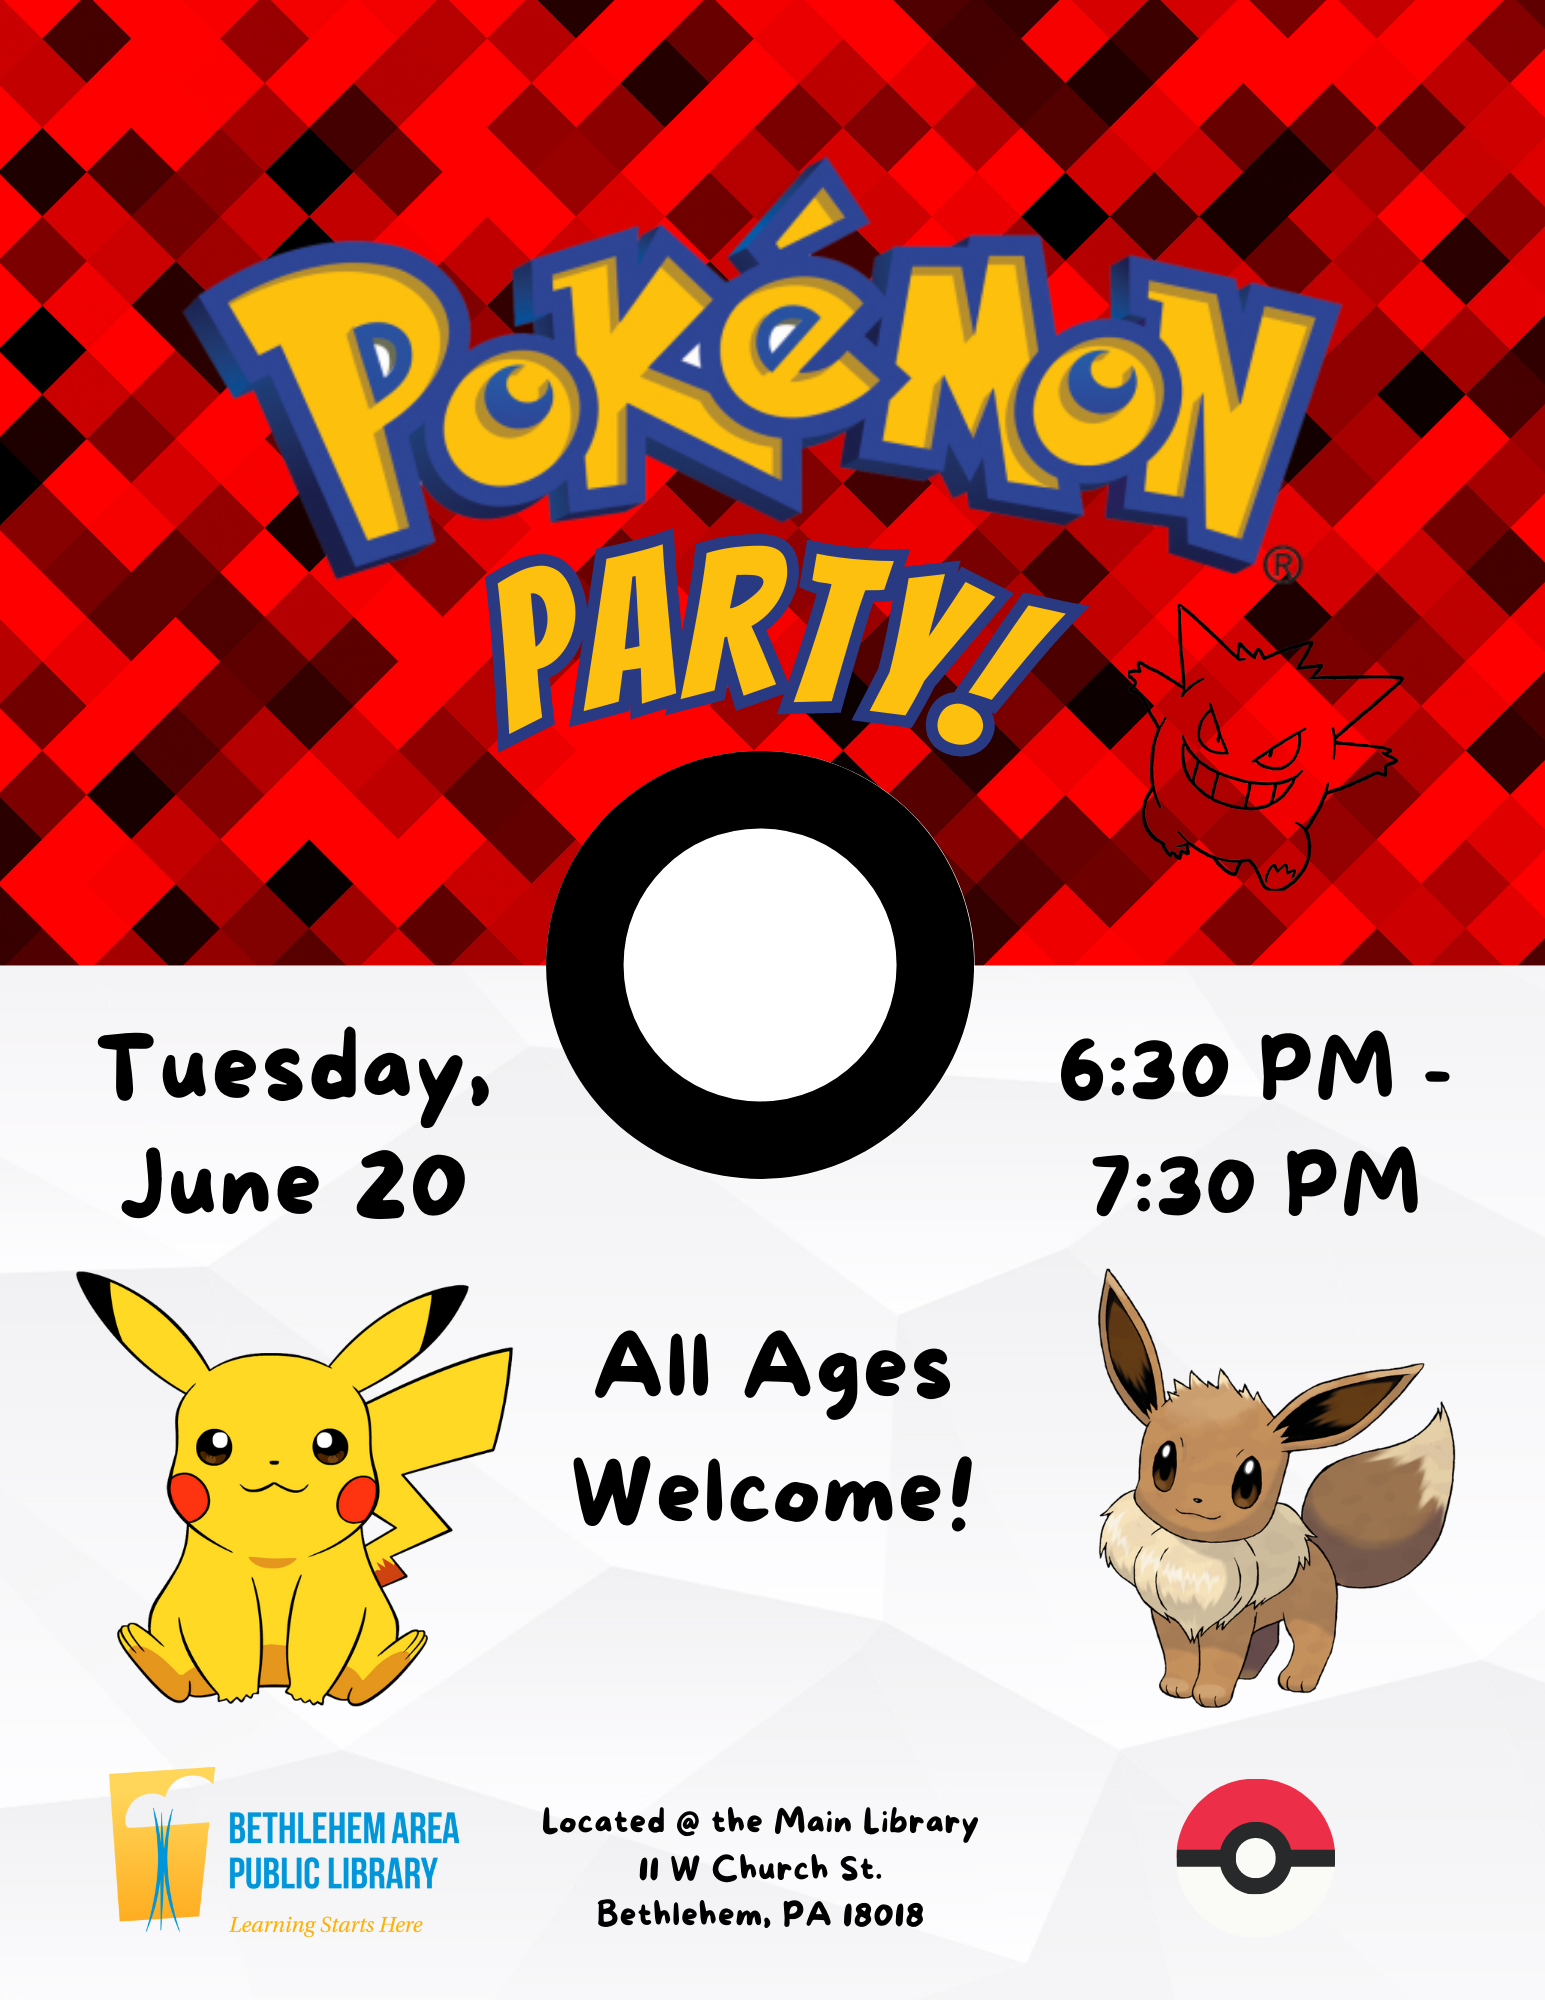 Event Pokemon Download Page